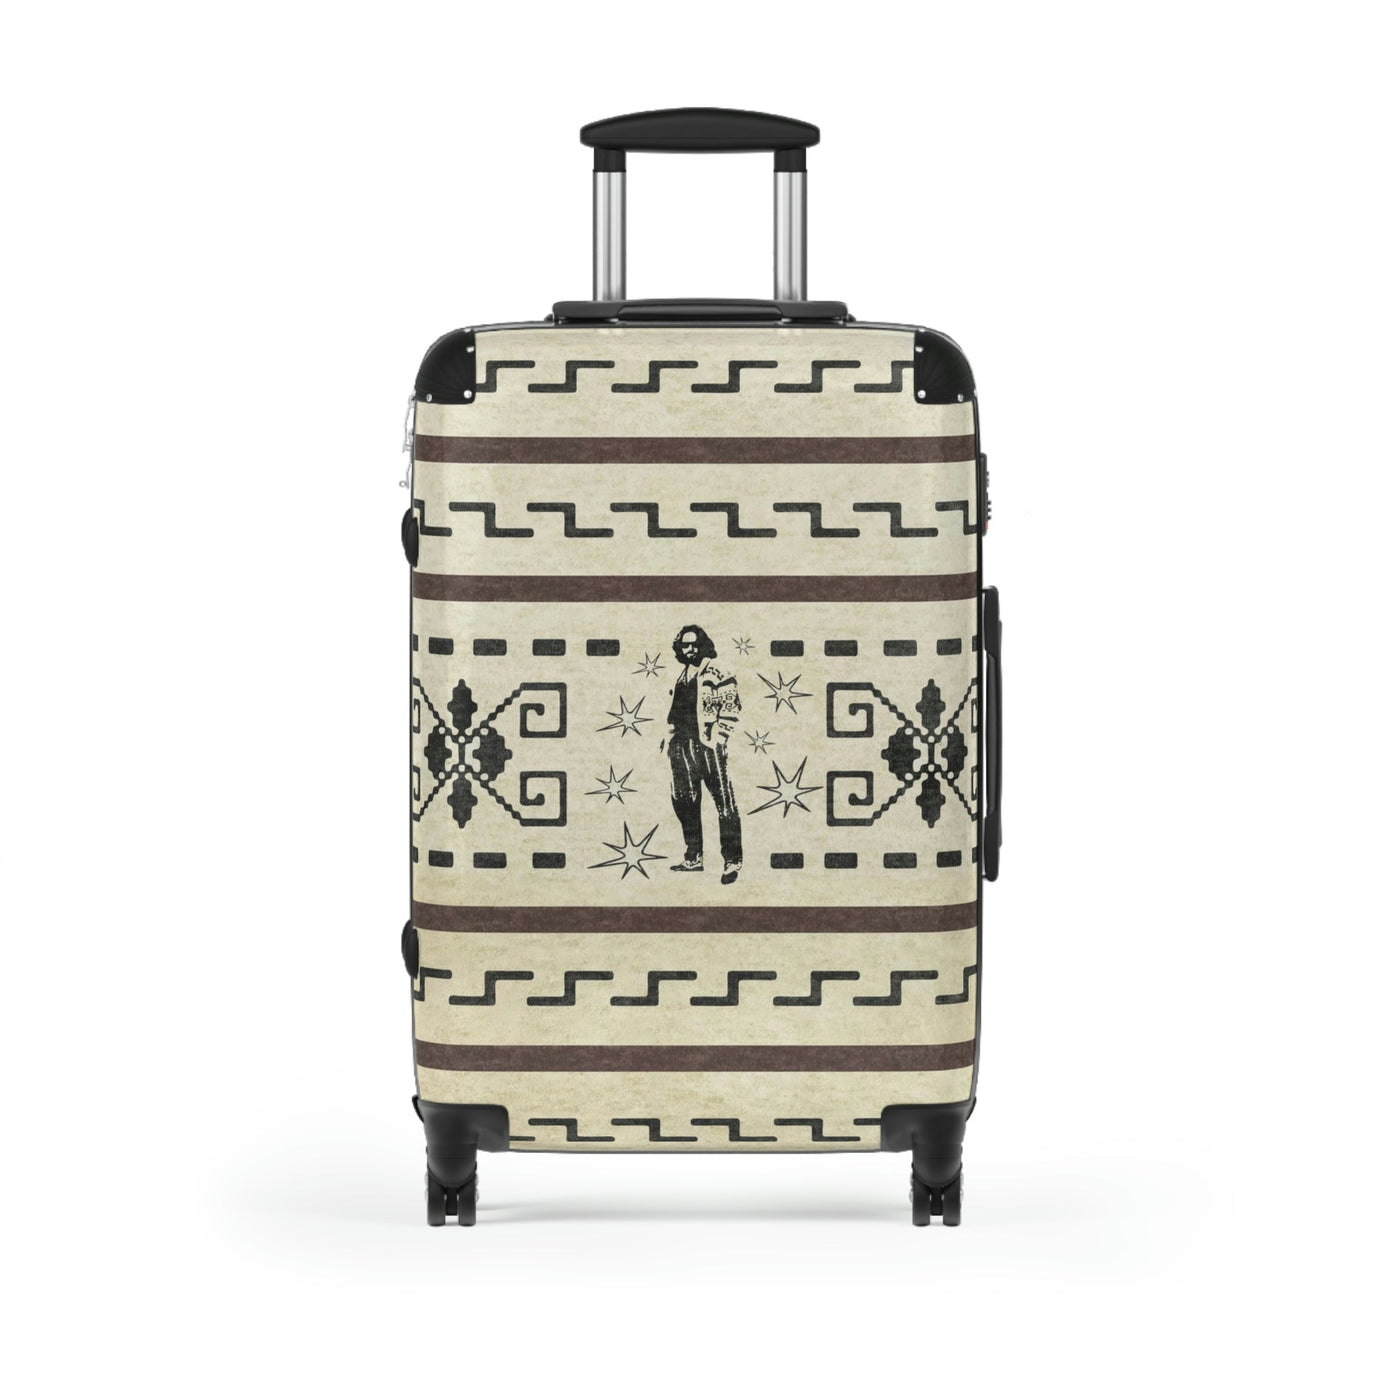 The Dude's Travel Suitcase W/ Iconic Lebowski Silhouette